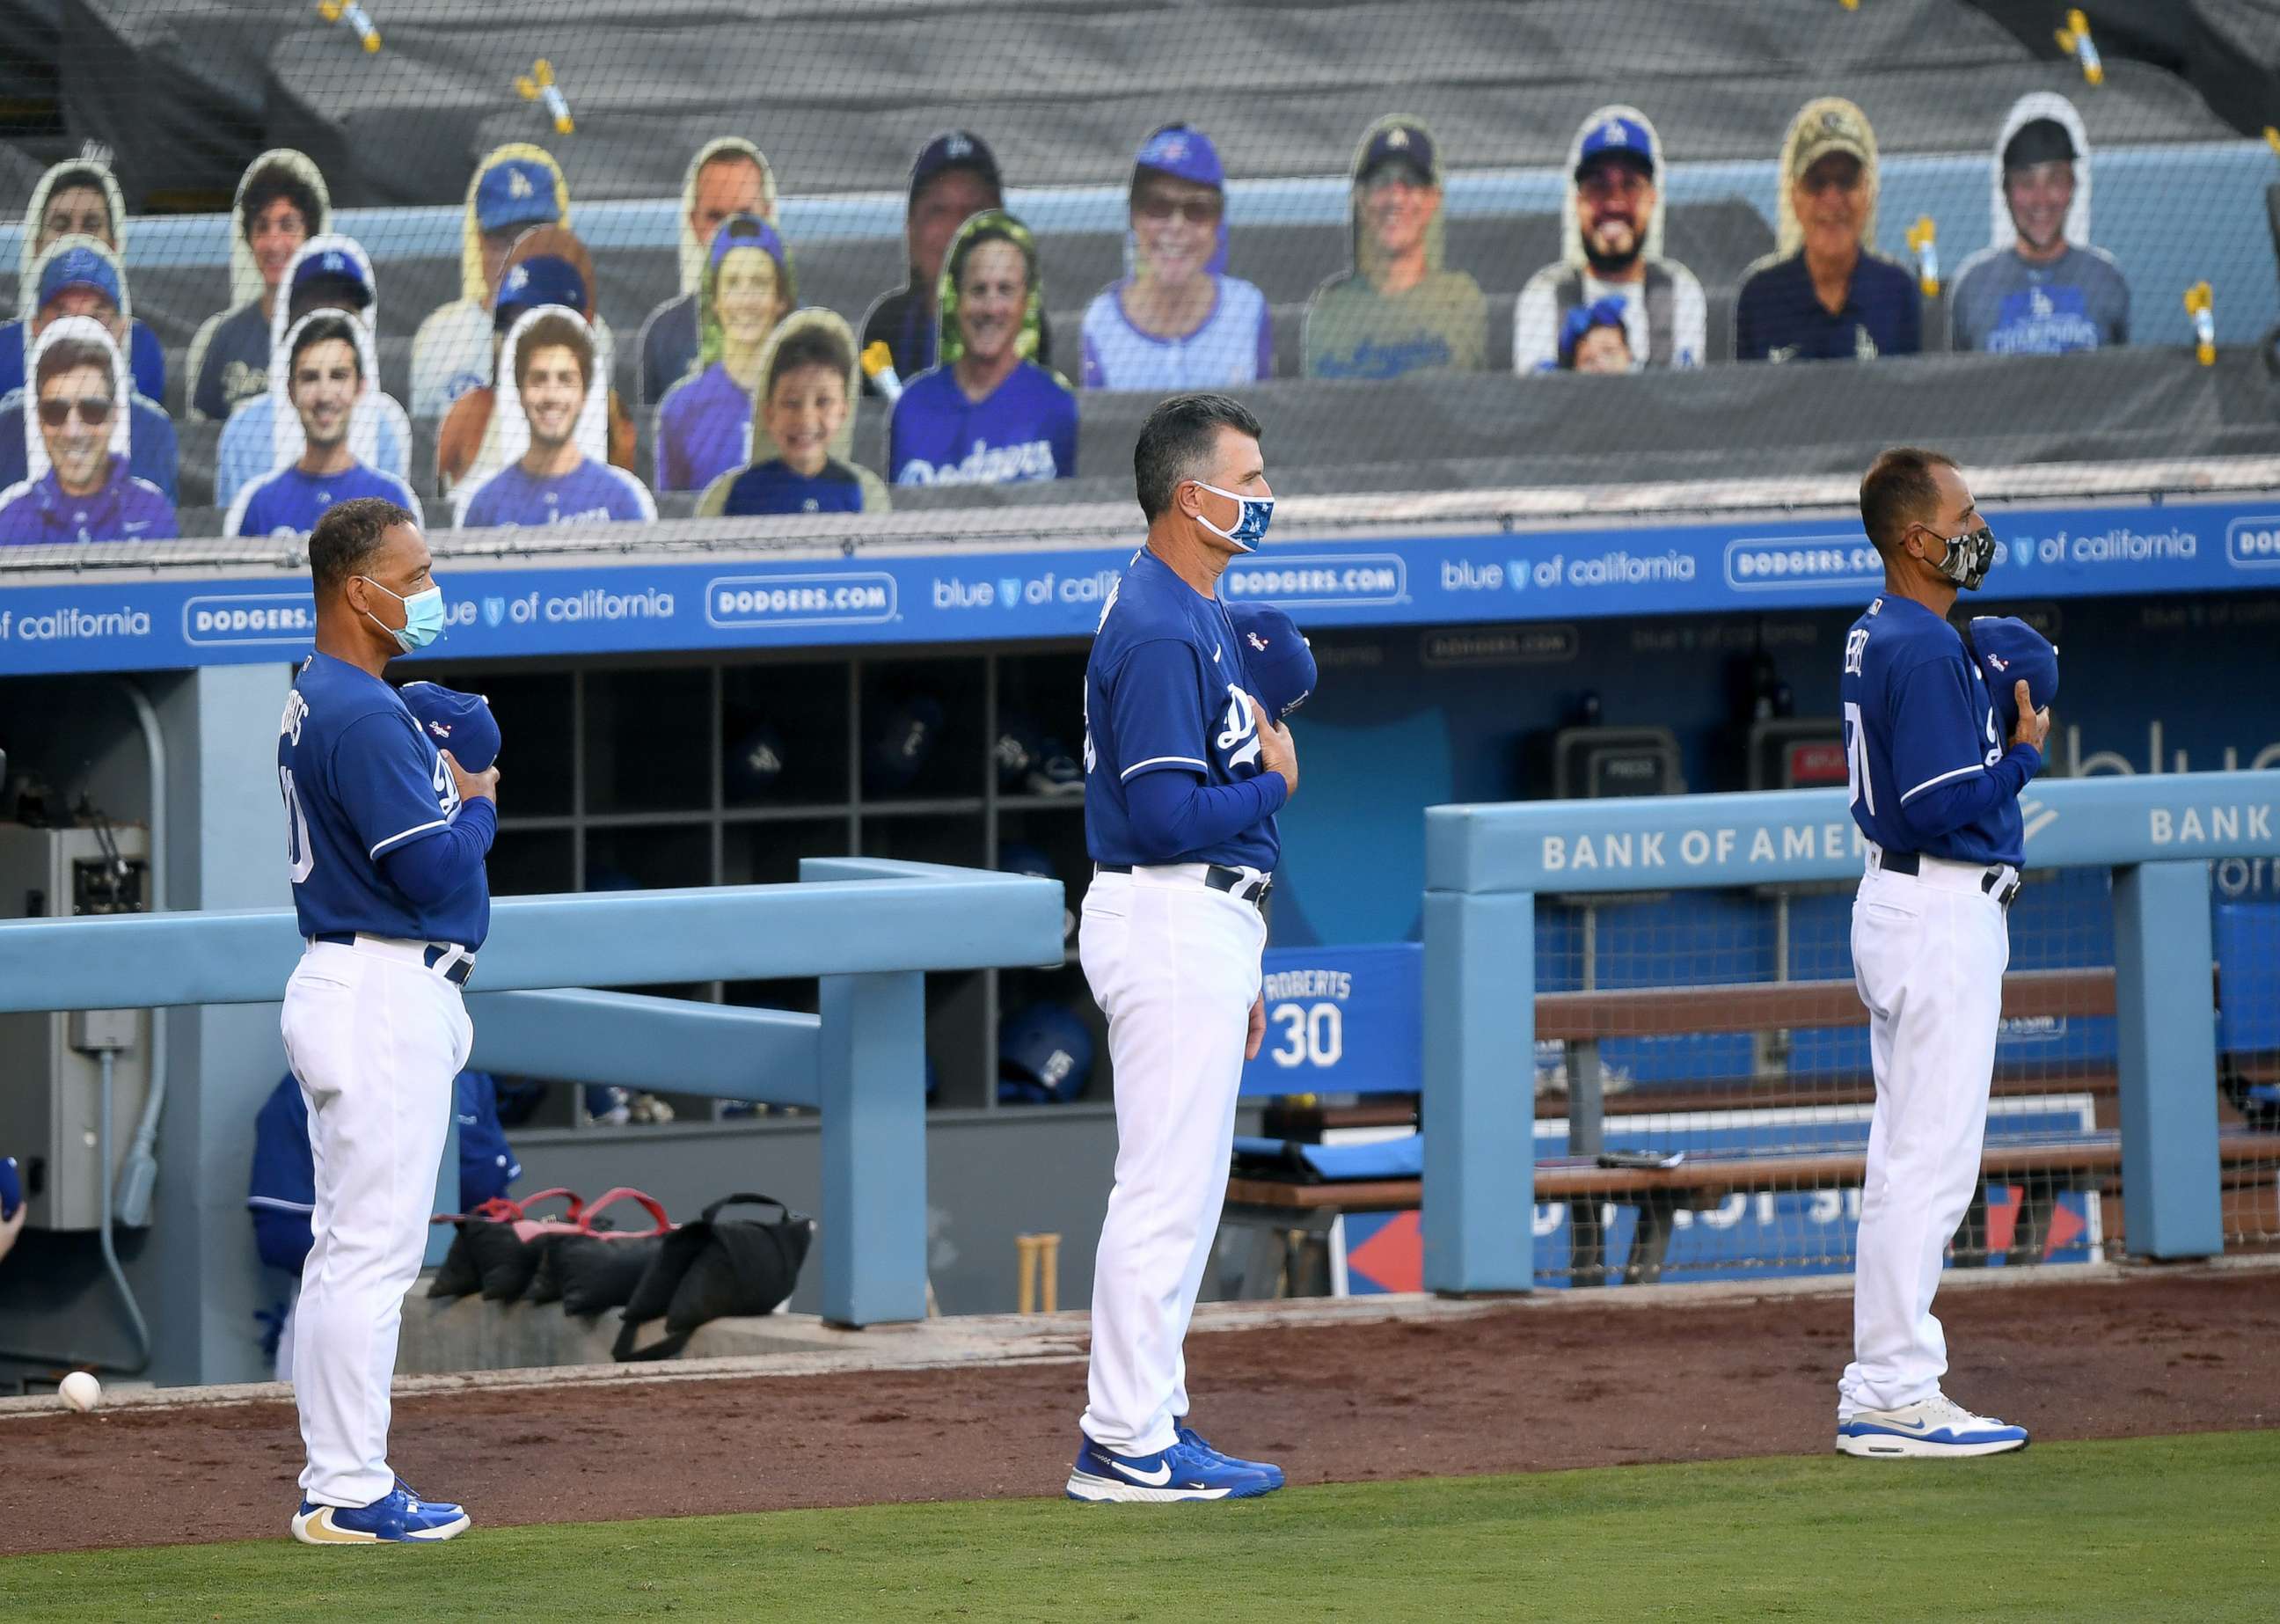 PHOTO: From left, manager Dave Roberts, Bob Geren, and Dino Ebel line up for the National Anthem for a preseason game against the Arizona Diamondbacks during the COVID-19 pandemic at Dodger Stadium on July 20, 2020, in Los Angeles.